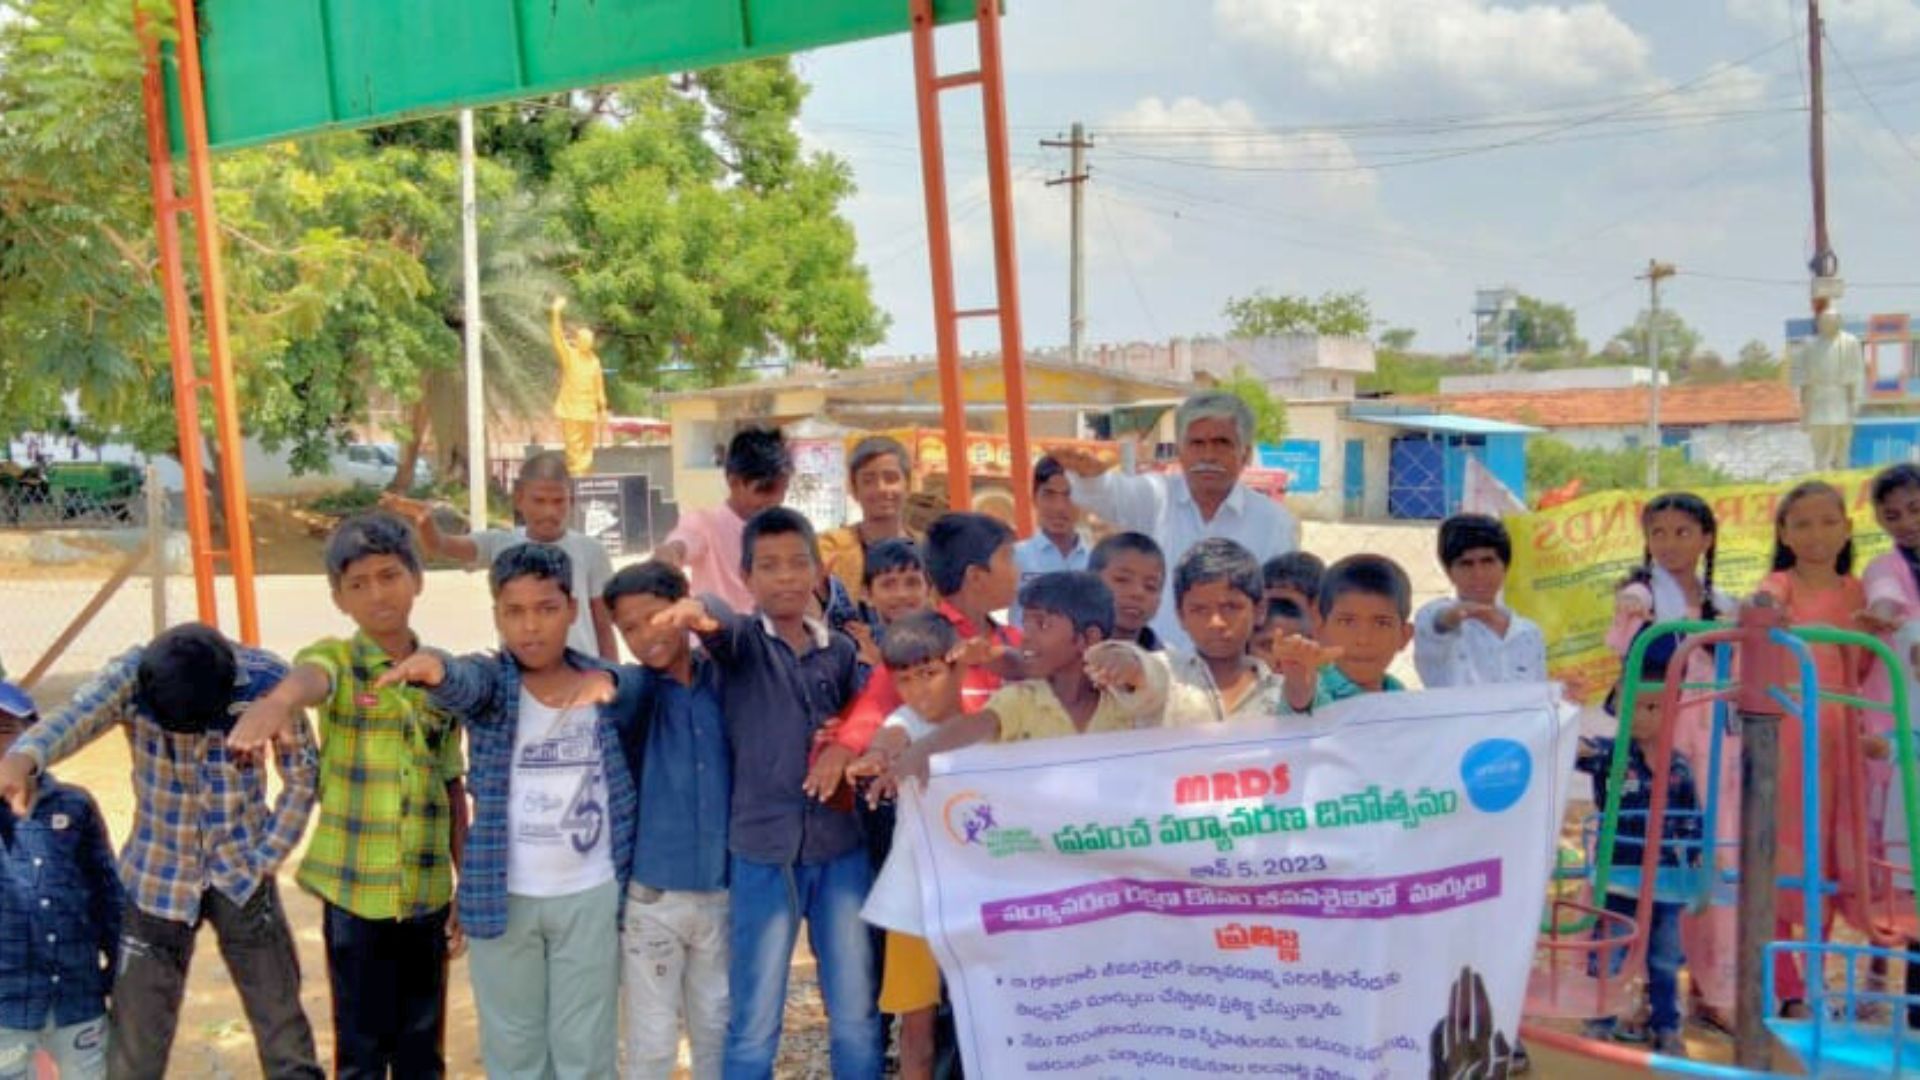 On the World Environment Day, adolescents and youth across the three states of Telangana, Andhra Pradesh and Karnataka took the Mission LiFE oath physically and online, to take positive action supporting climate action to preserve the environment.